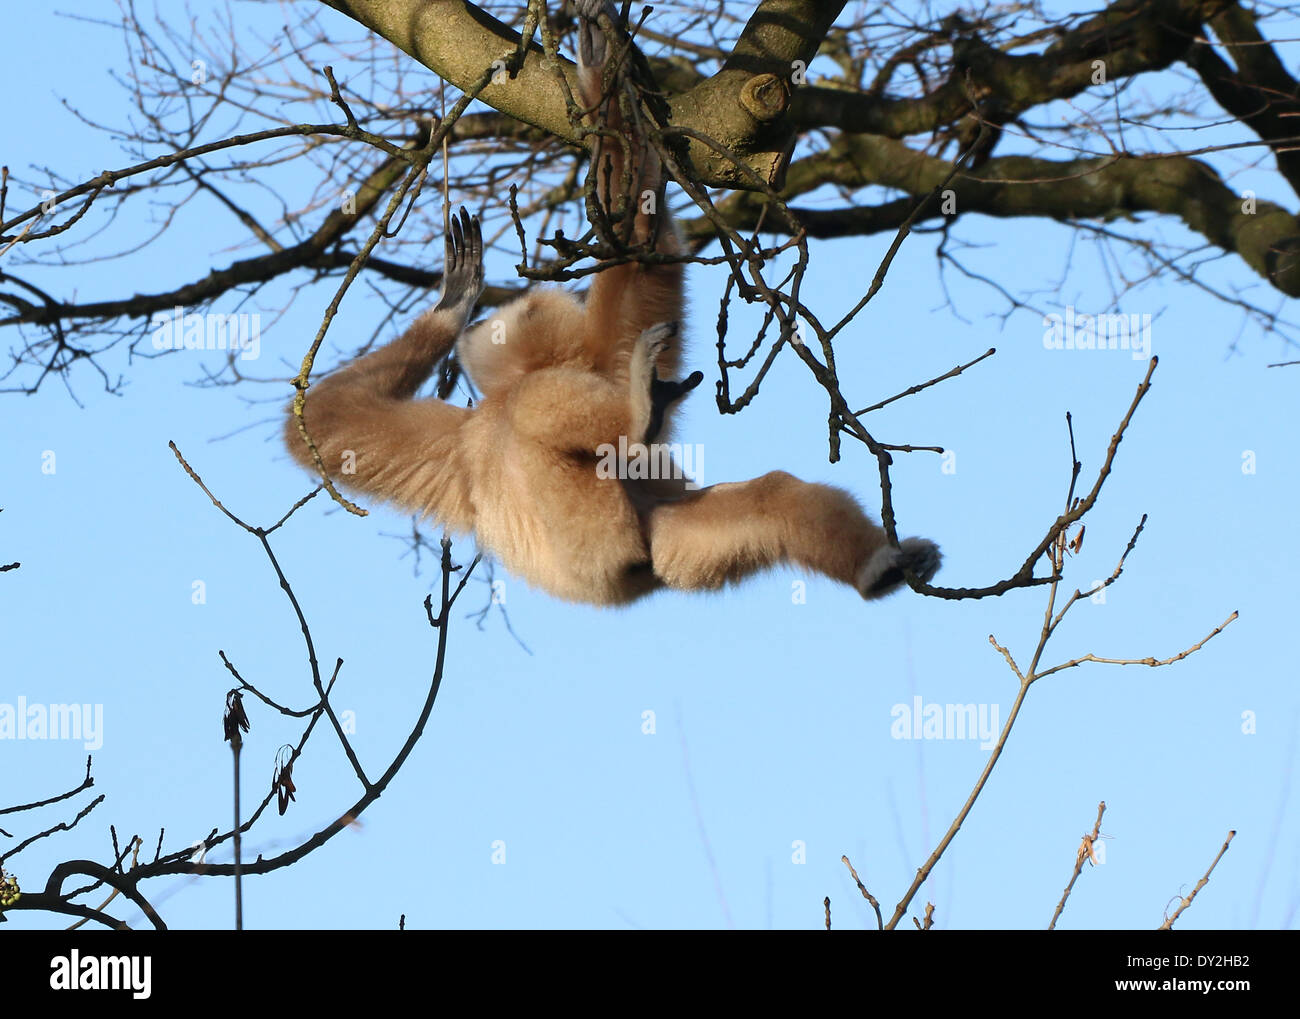 Lar Gibbon or  White-Handed gibbon (Hylobates lar) hanging from a branch Stock Photo